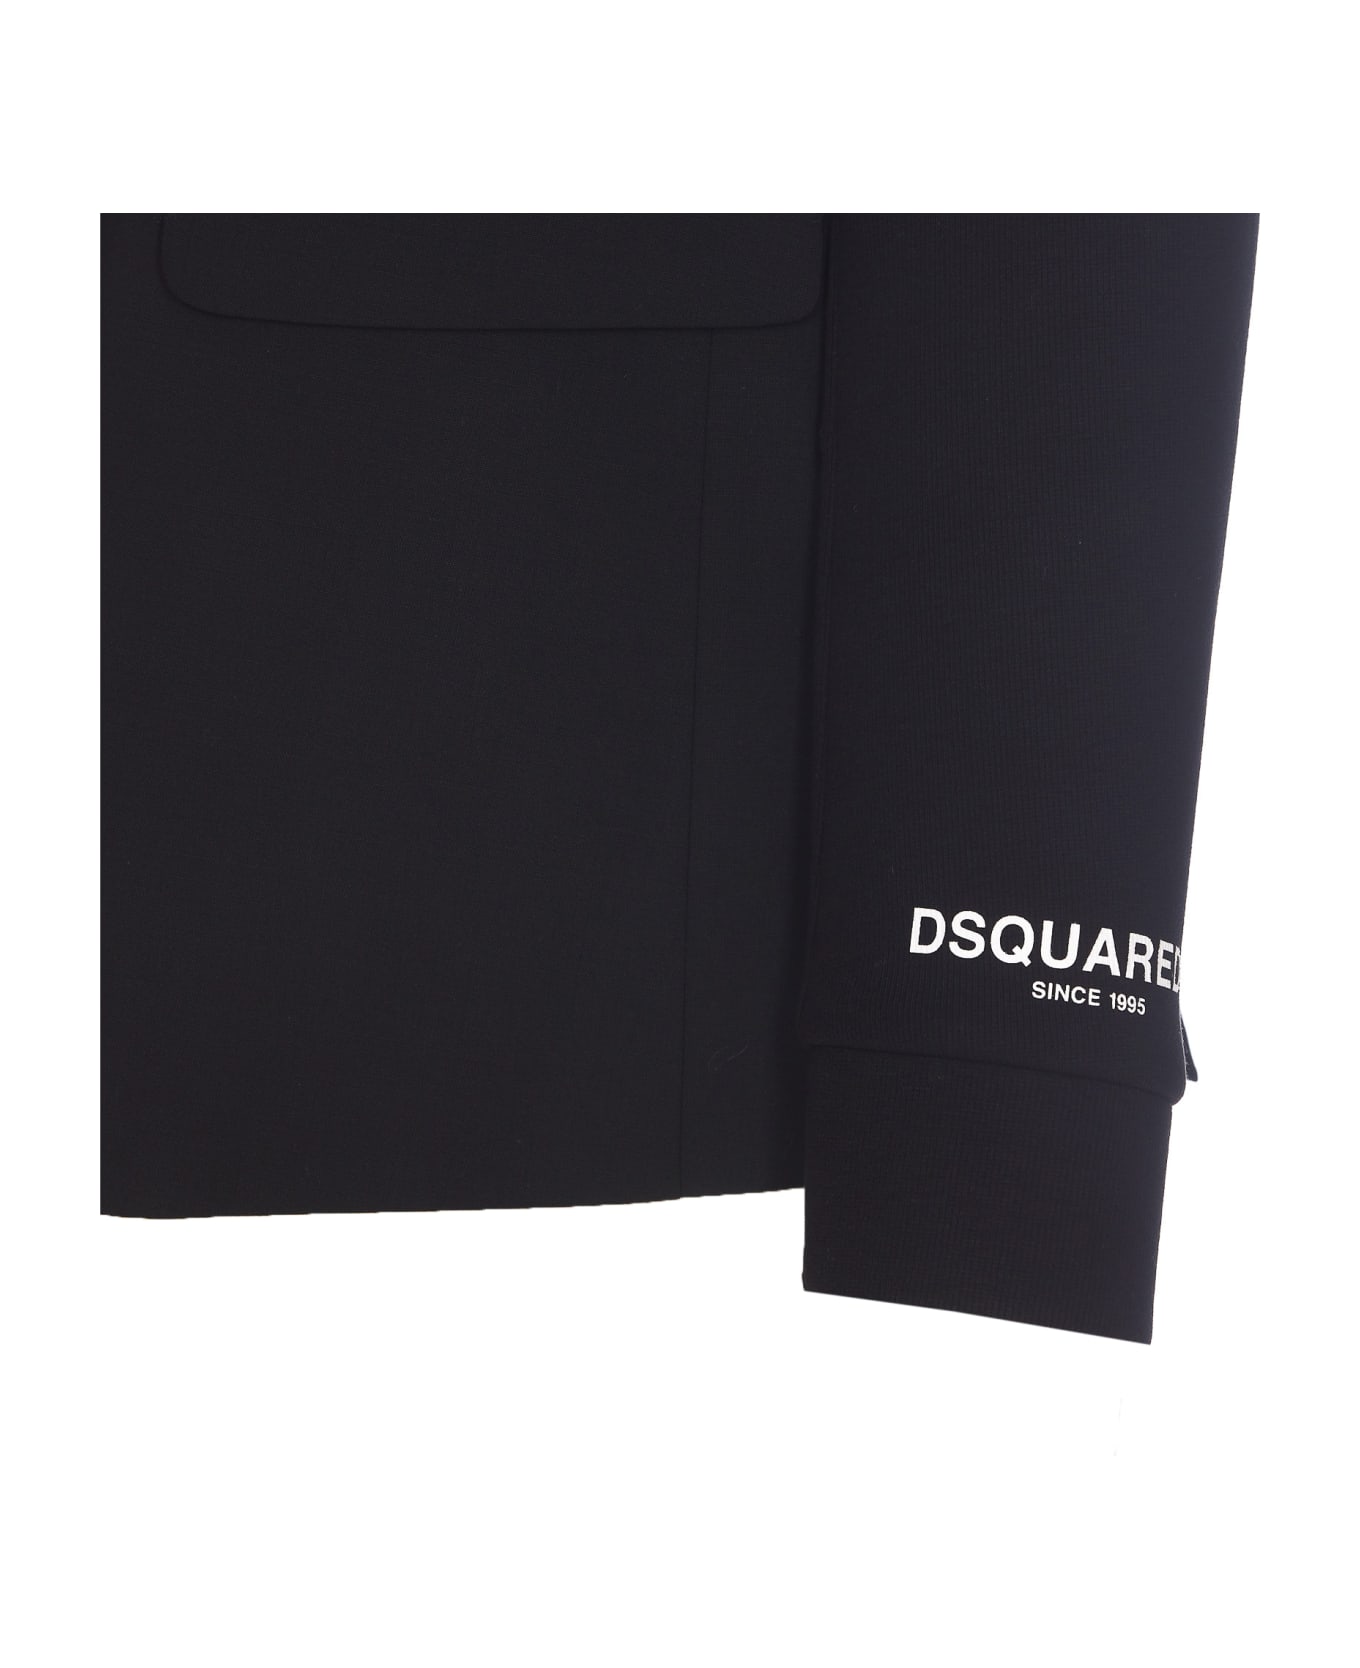 Dsquared2 Hooded Relax Jacket - Black